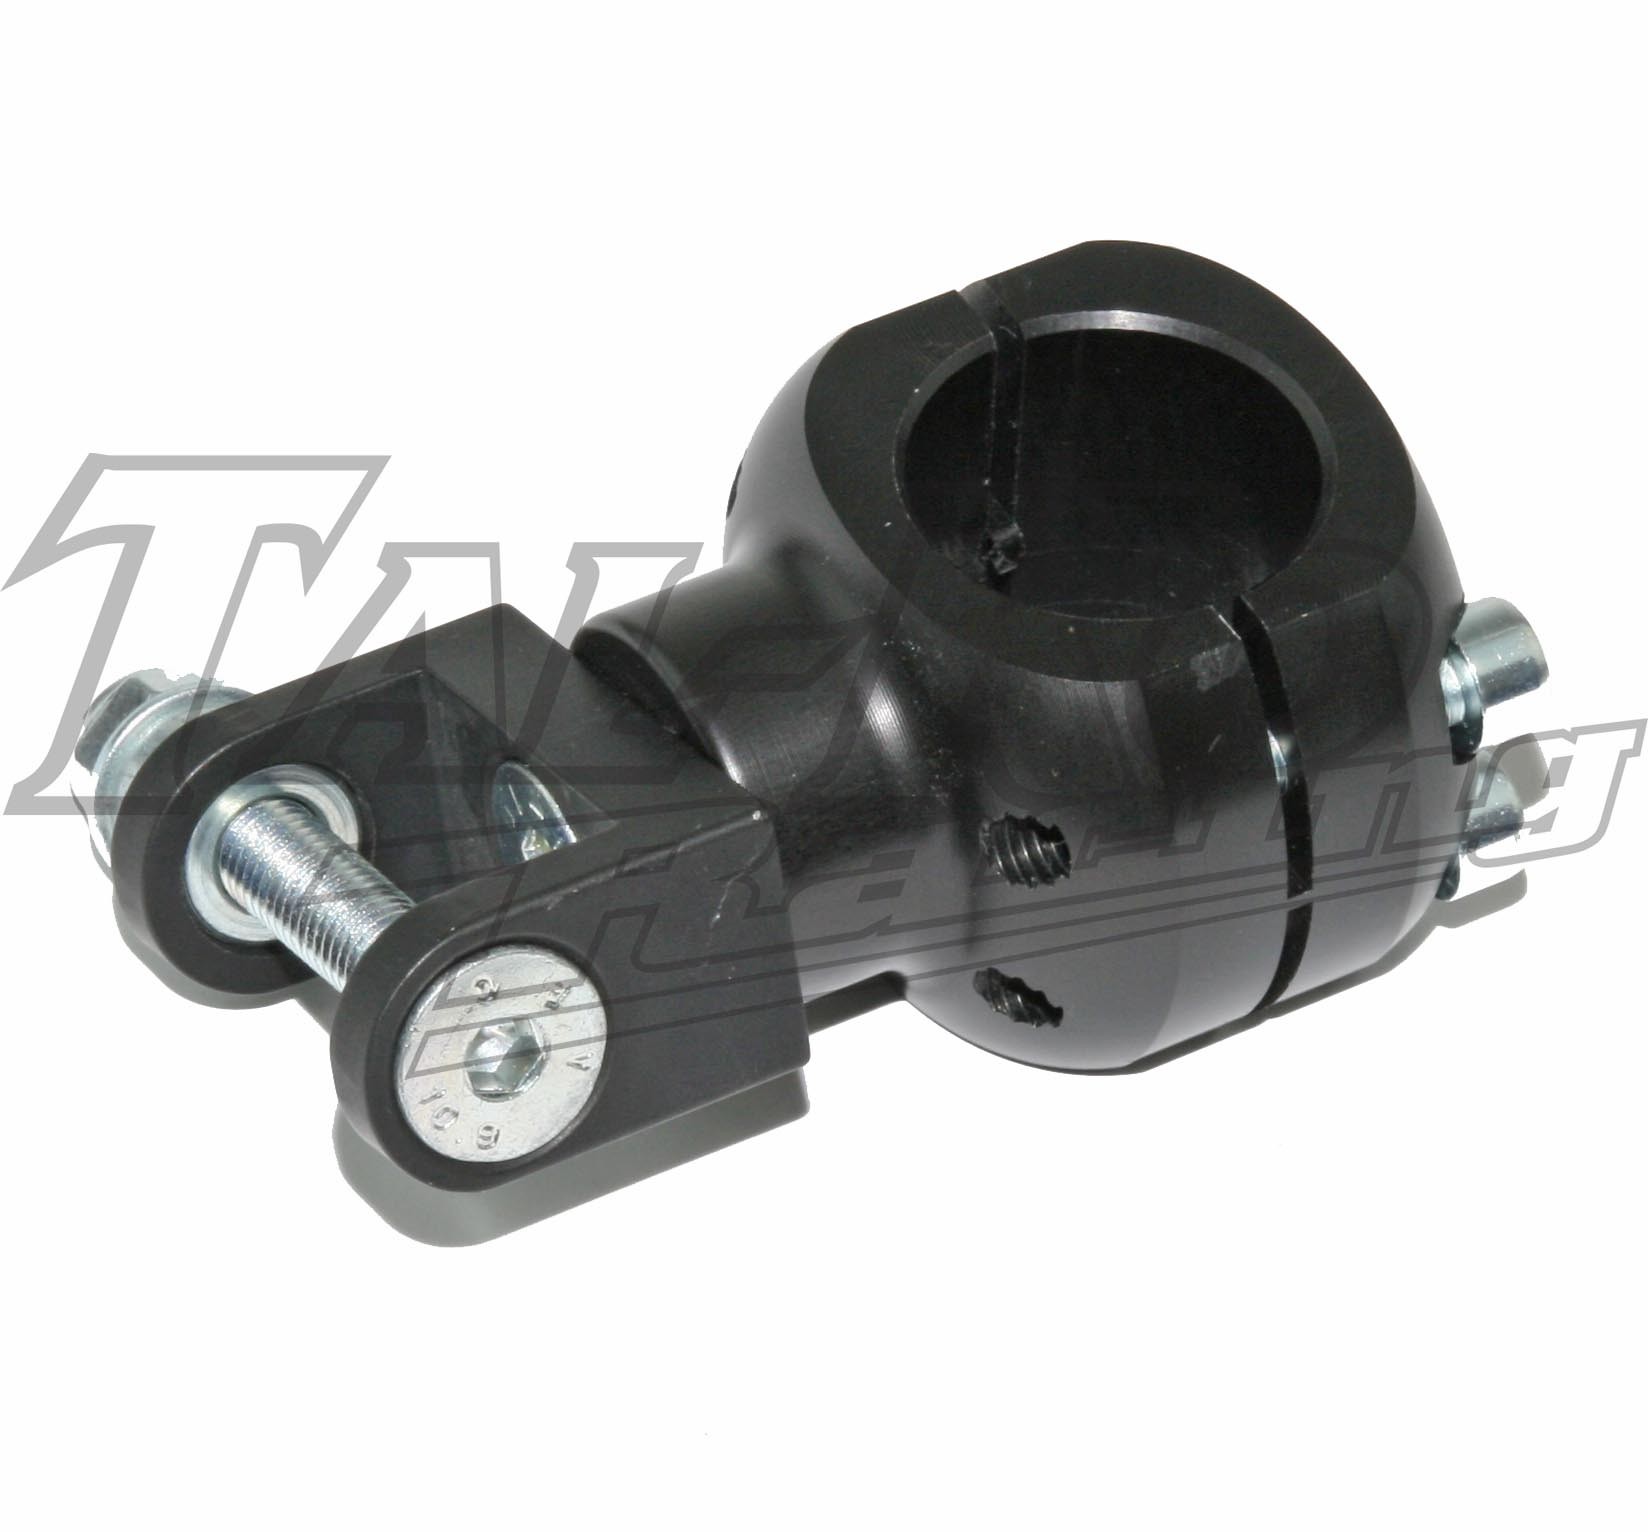 CHASSIS MOUNT FOR WATER PUMP 28mm